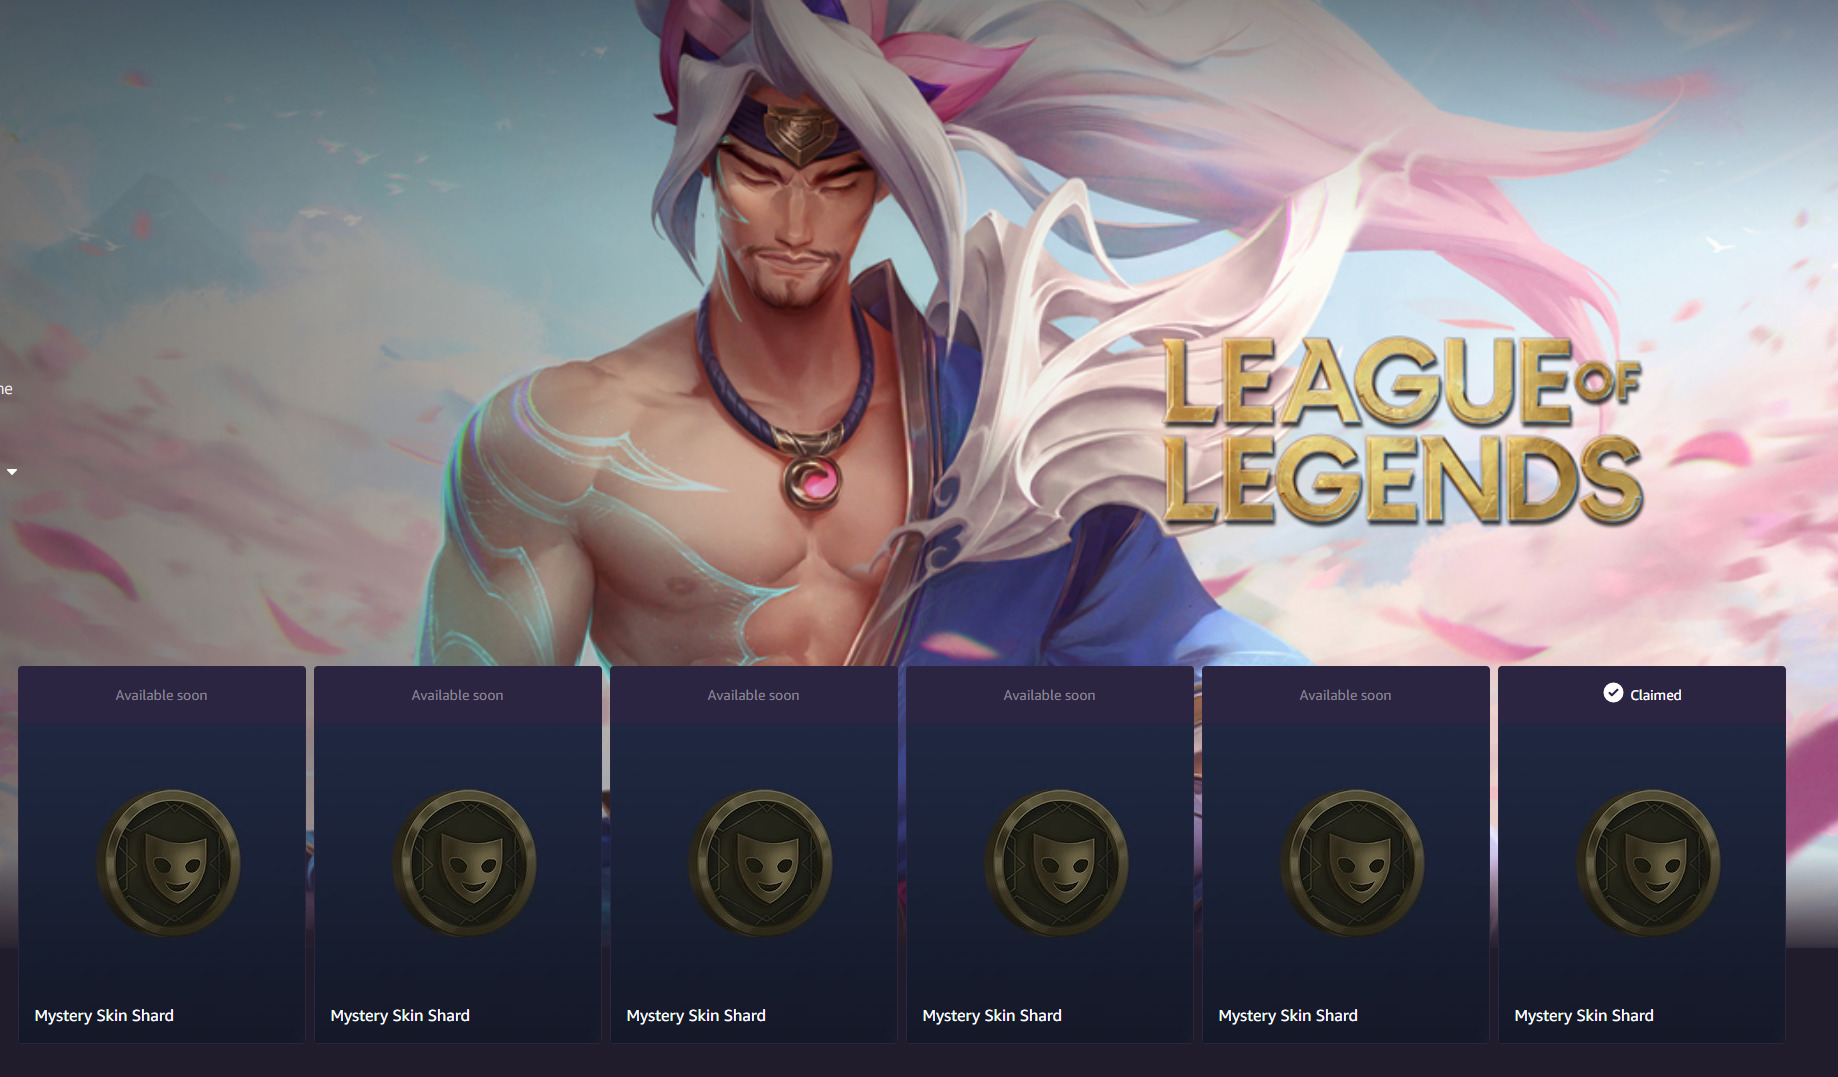 League Of Legends And Teamfight Tactics Twitch Prime Loot Available Now Dot Esports